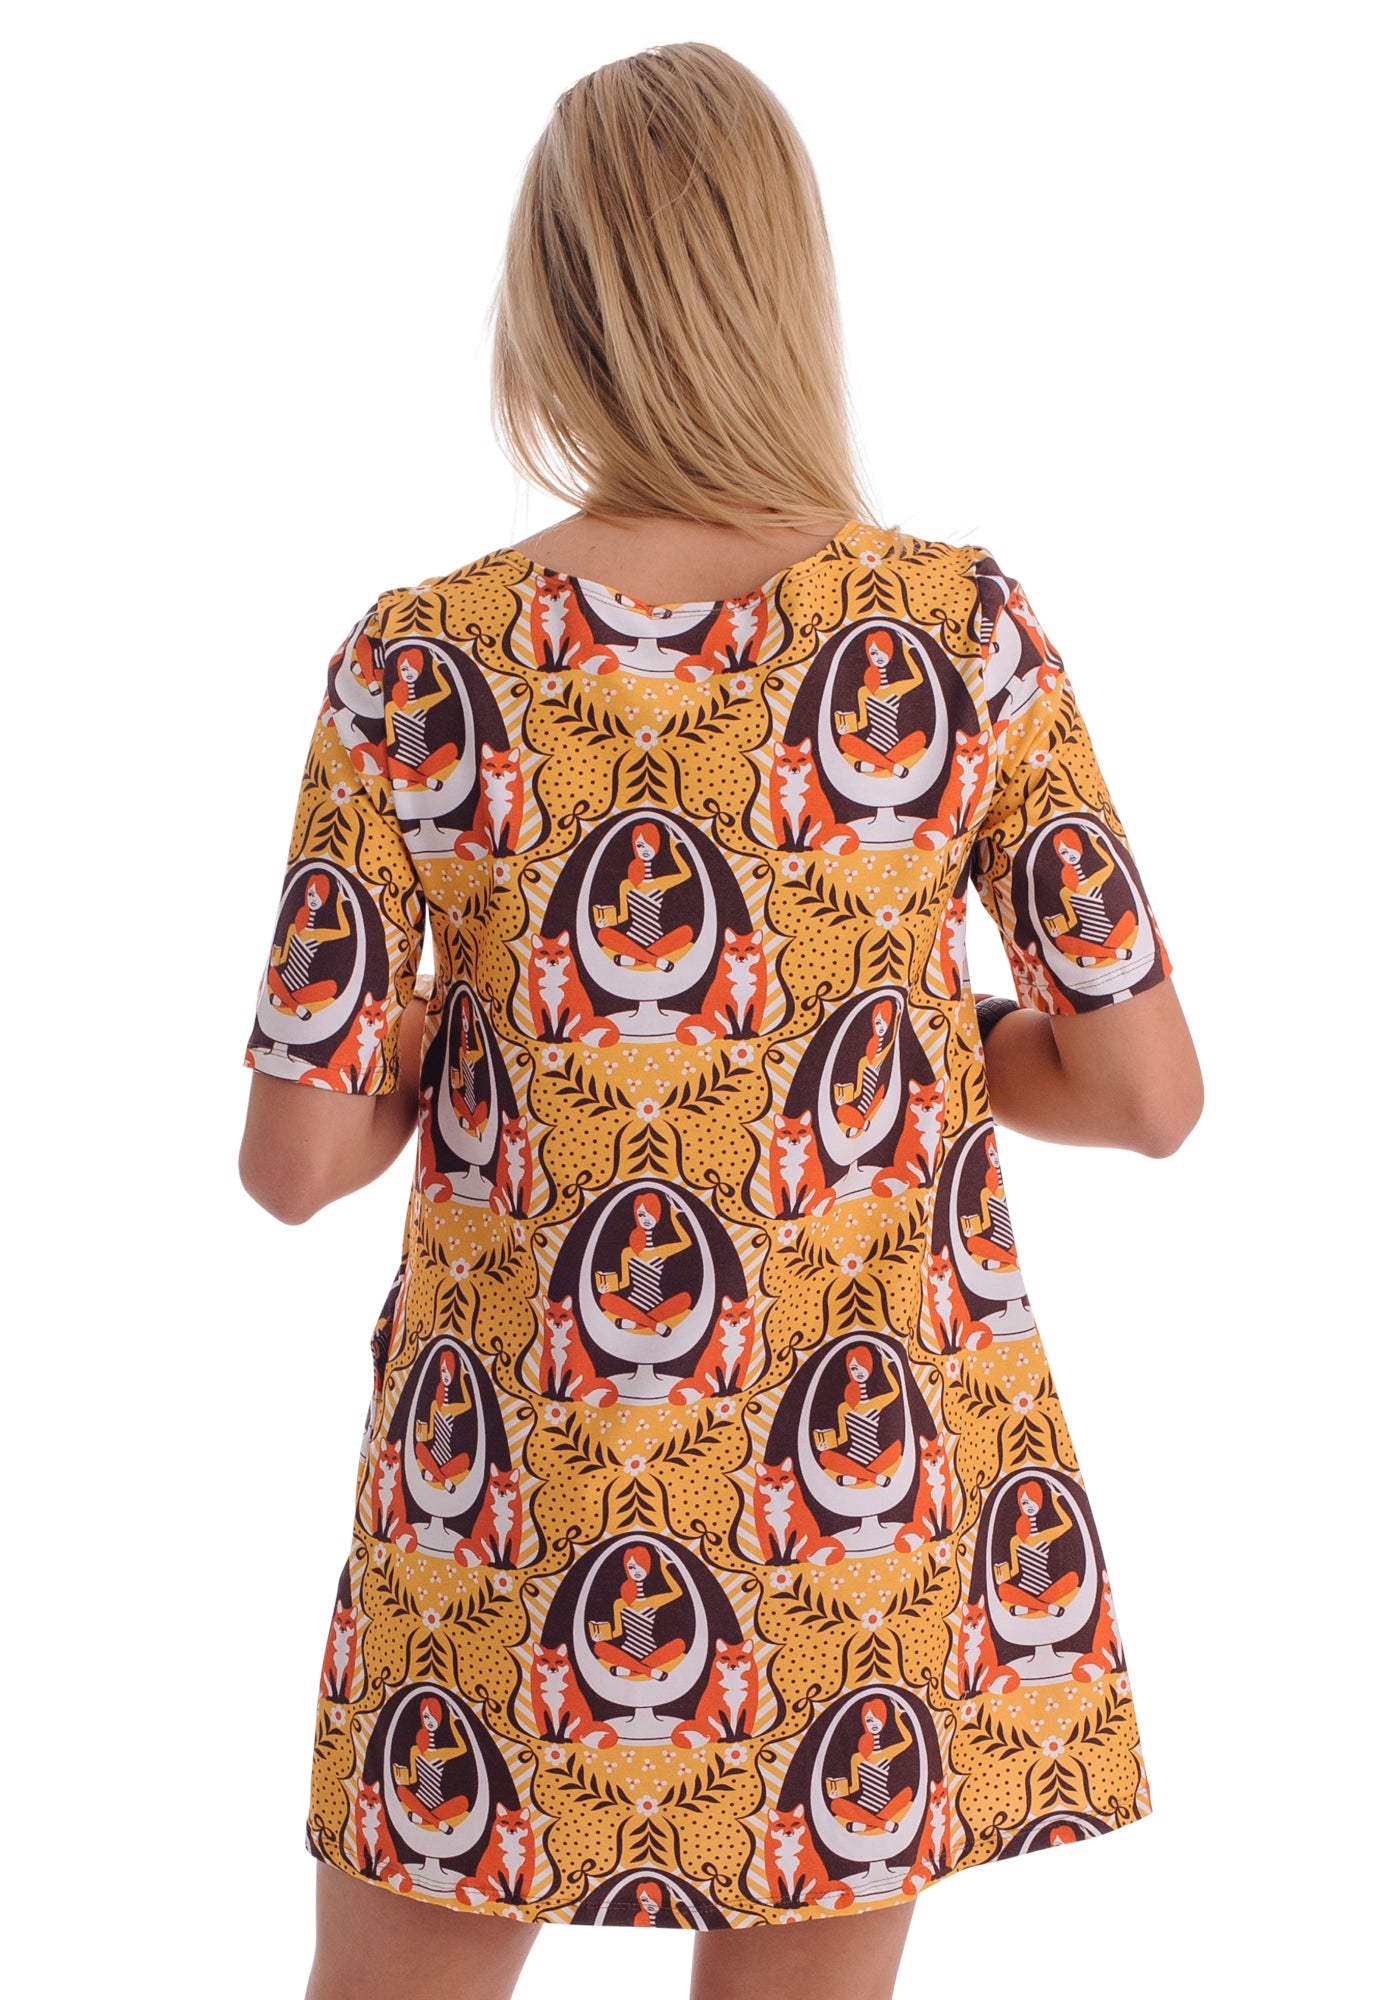 Back view of mustard yellow pocket tunic featuring print of foxes and girls reading books sitting in an egg chair